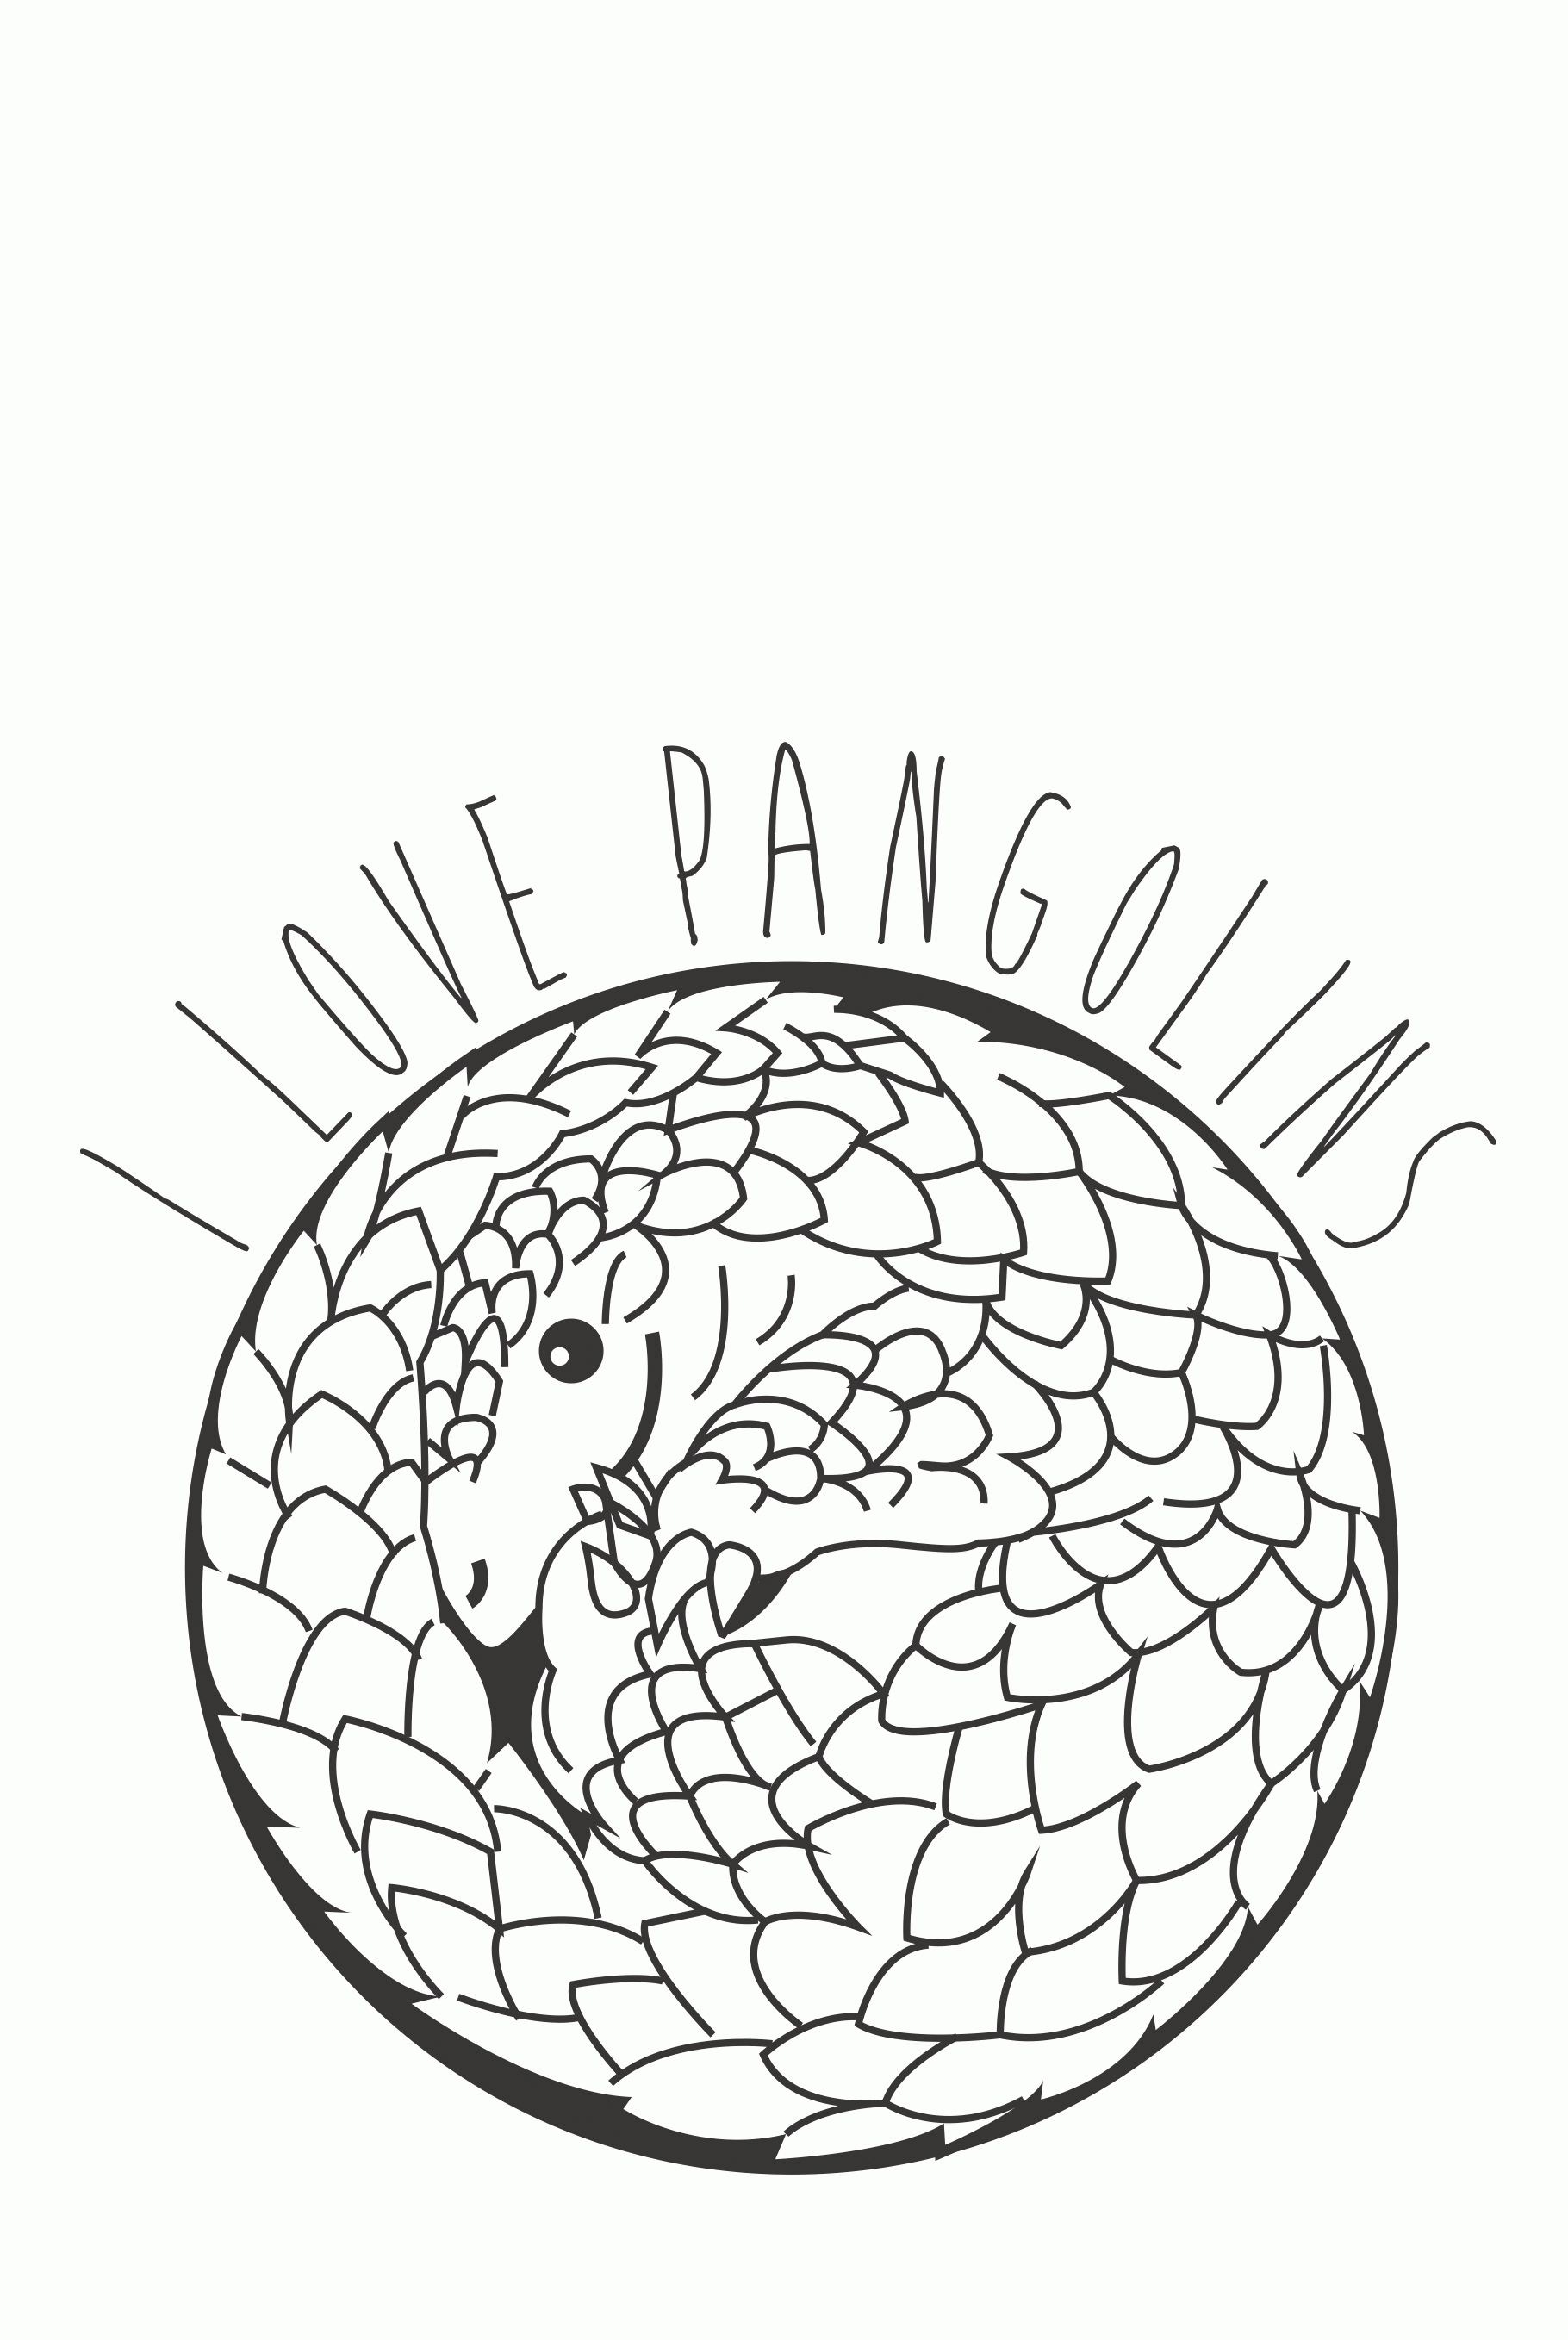 PANGOLIN CONSERVATION PROJECT